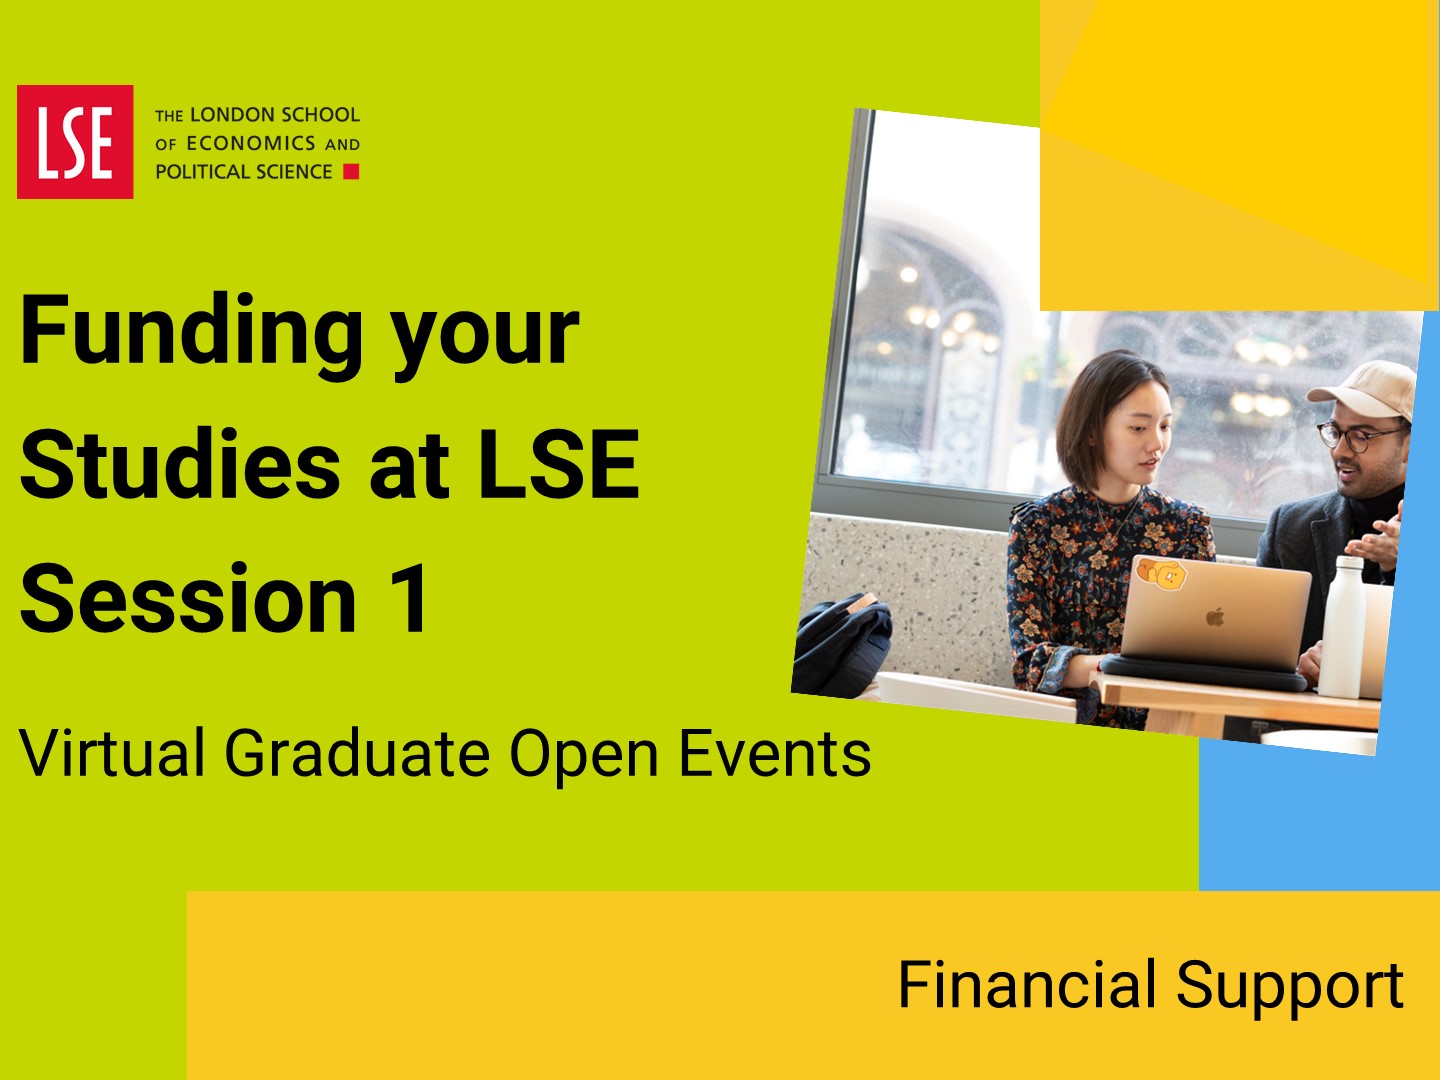 Funding your studies at LSE (session 1)